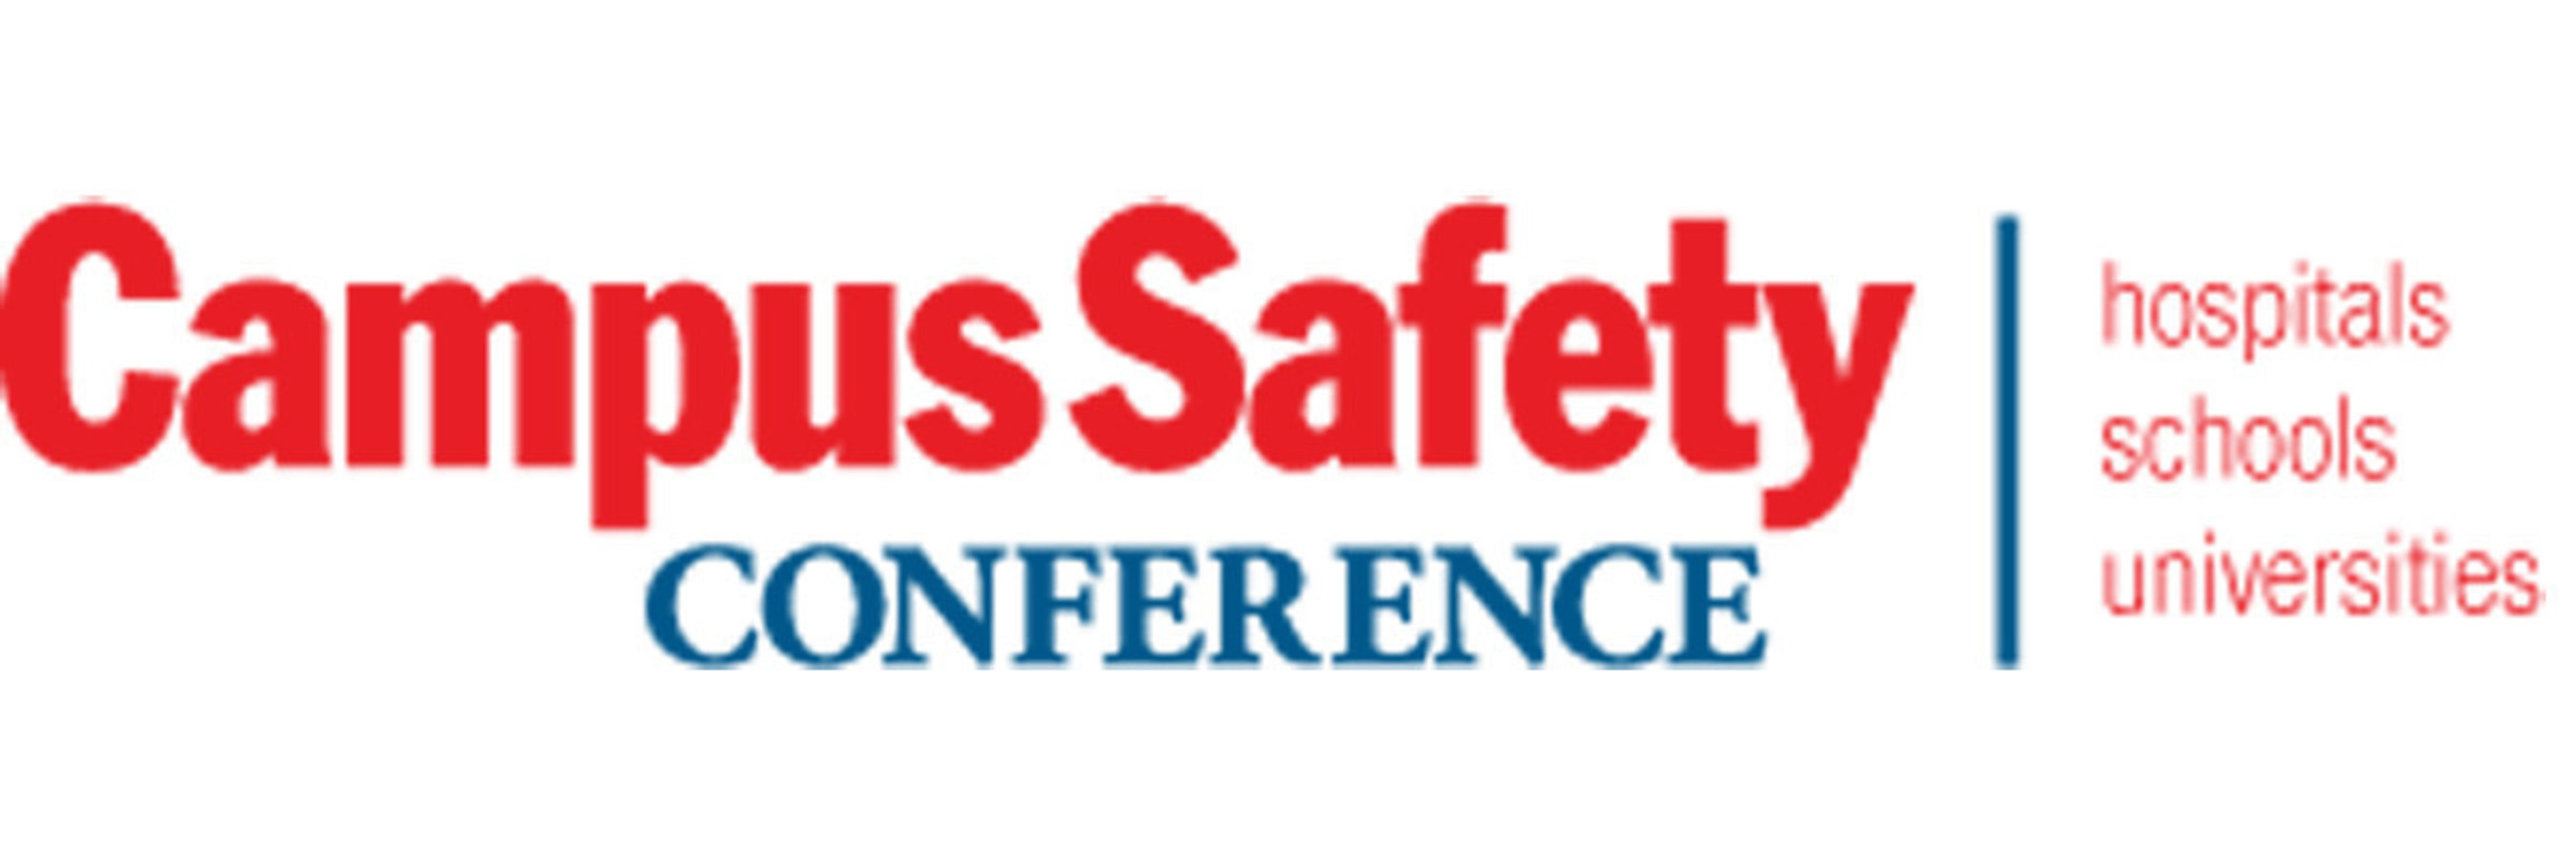 Campus Safety Events logo